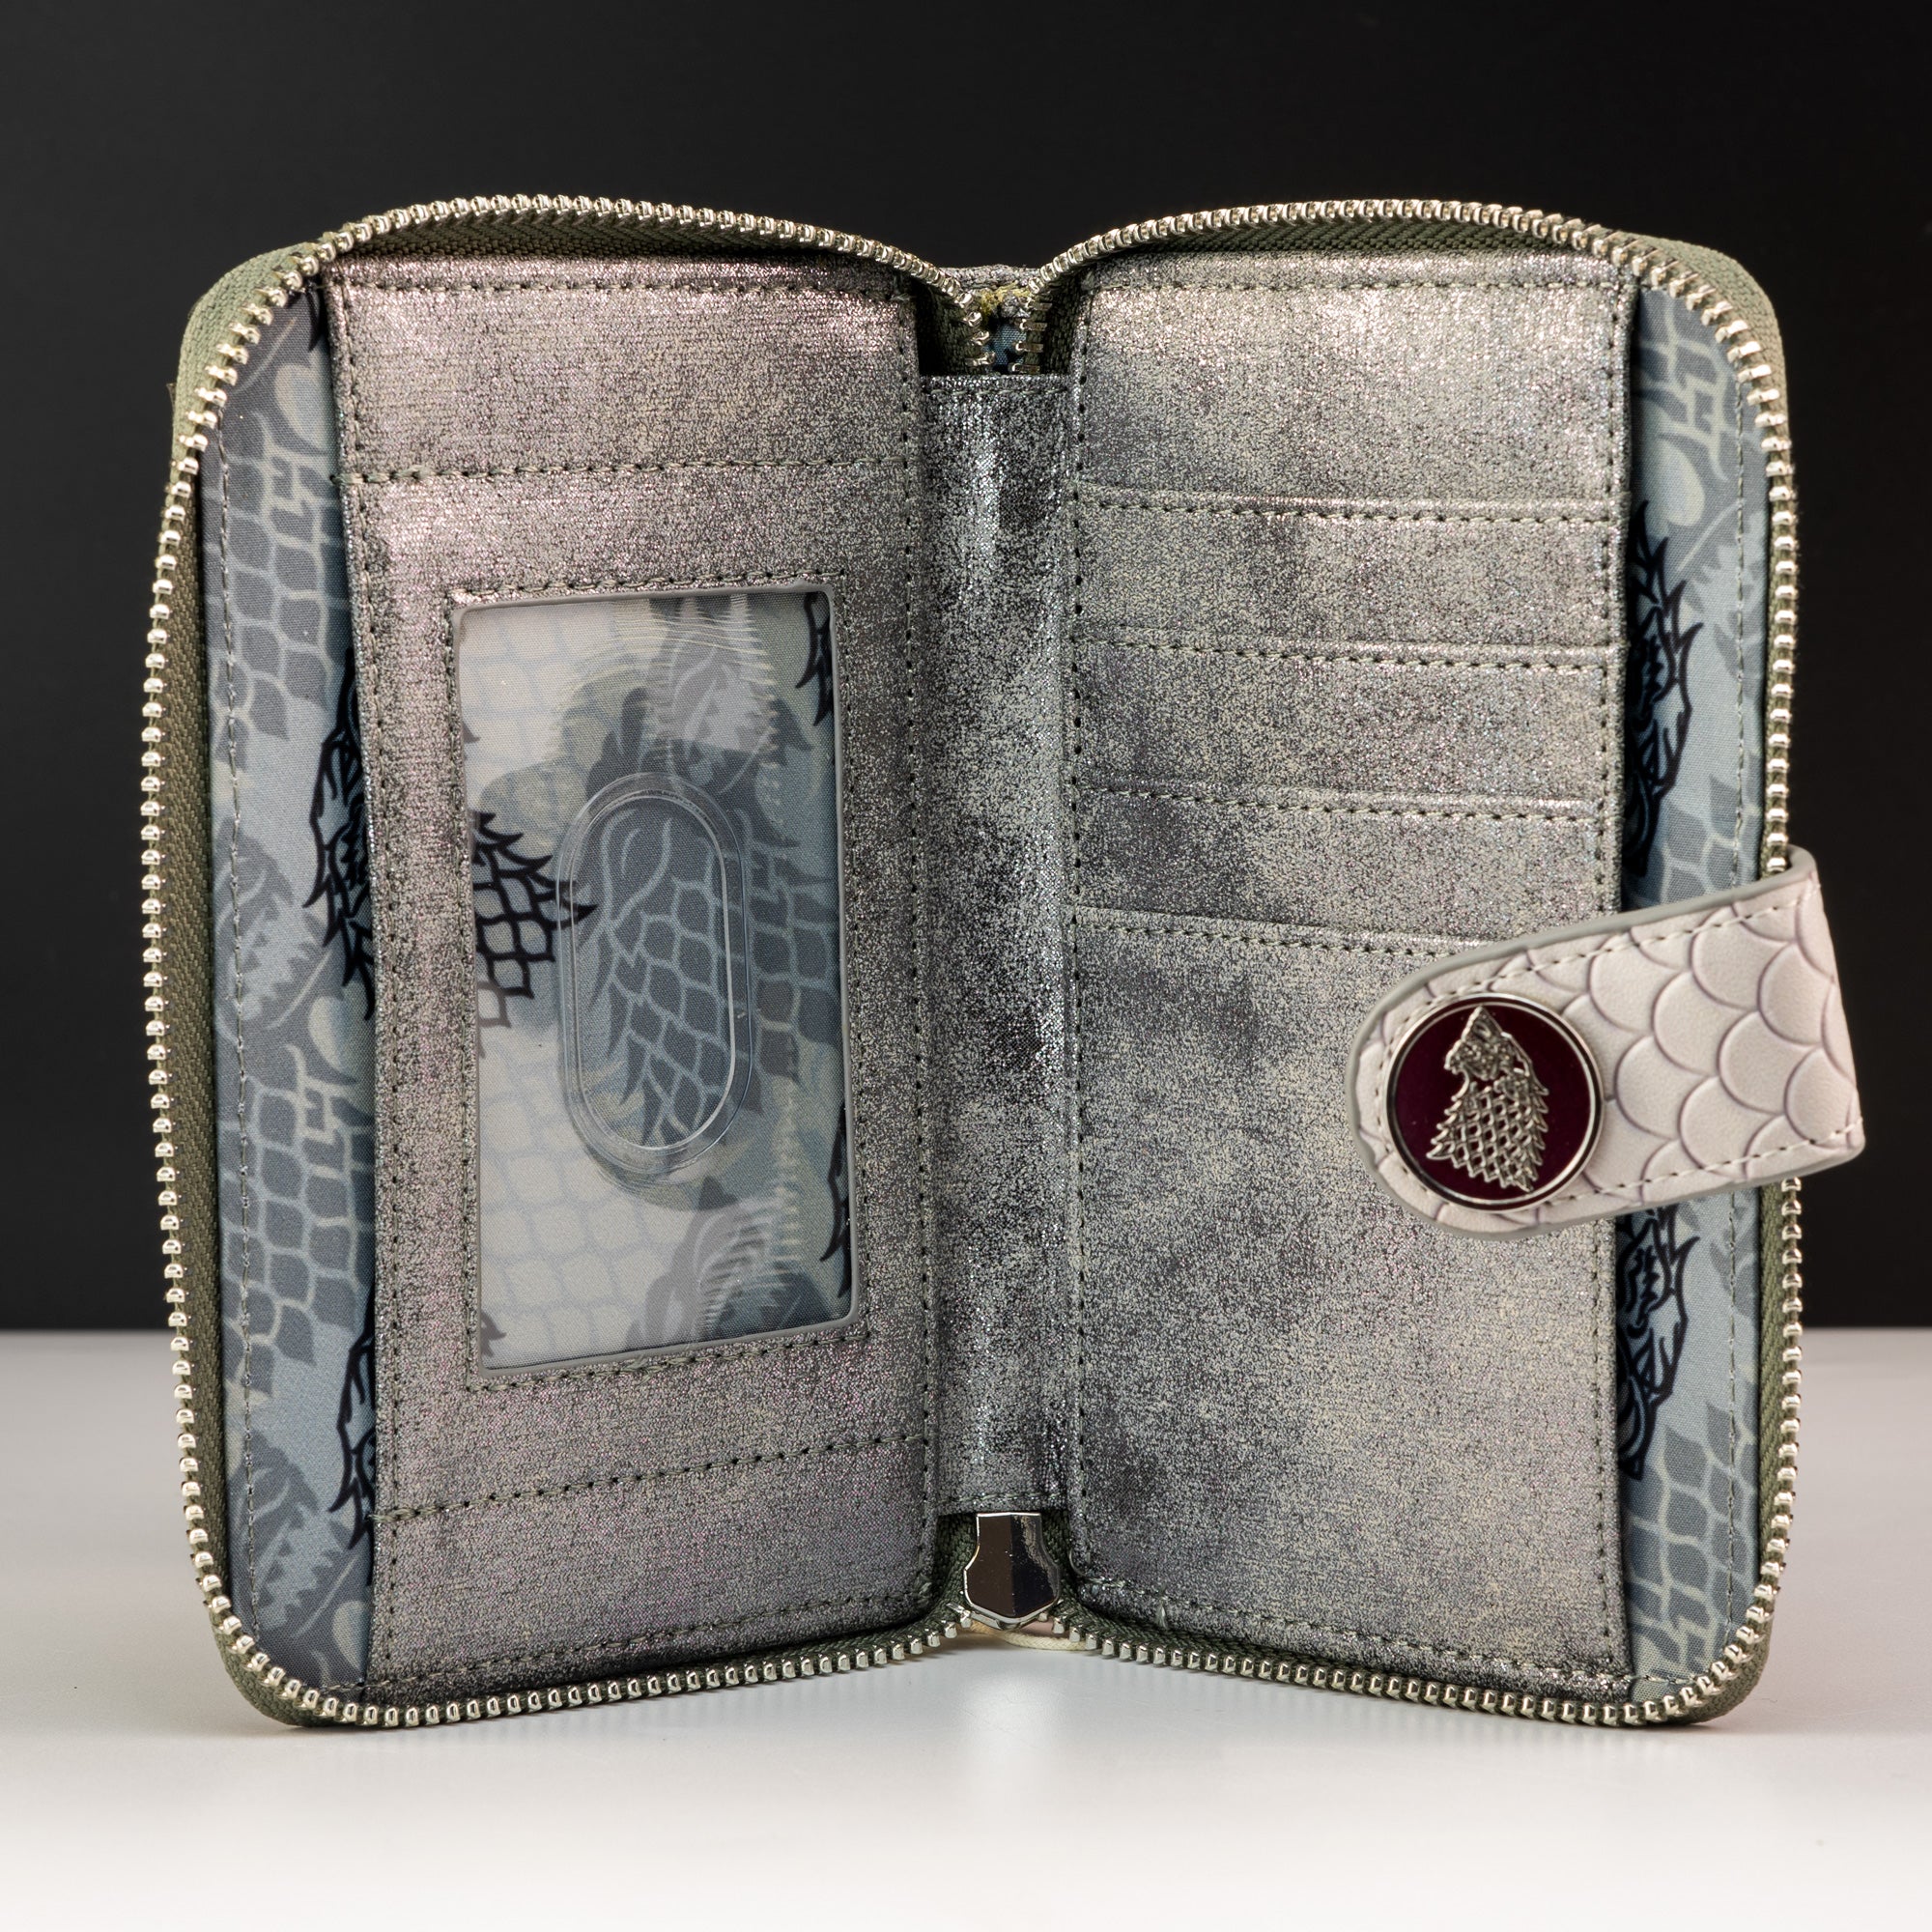 Loungefly x Game of Thrones Sansa Stark Queen in the North Wallet